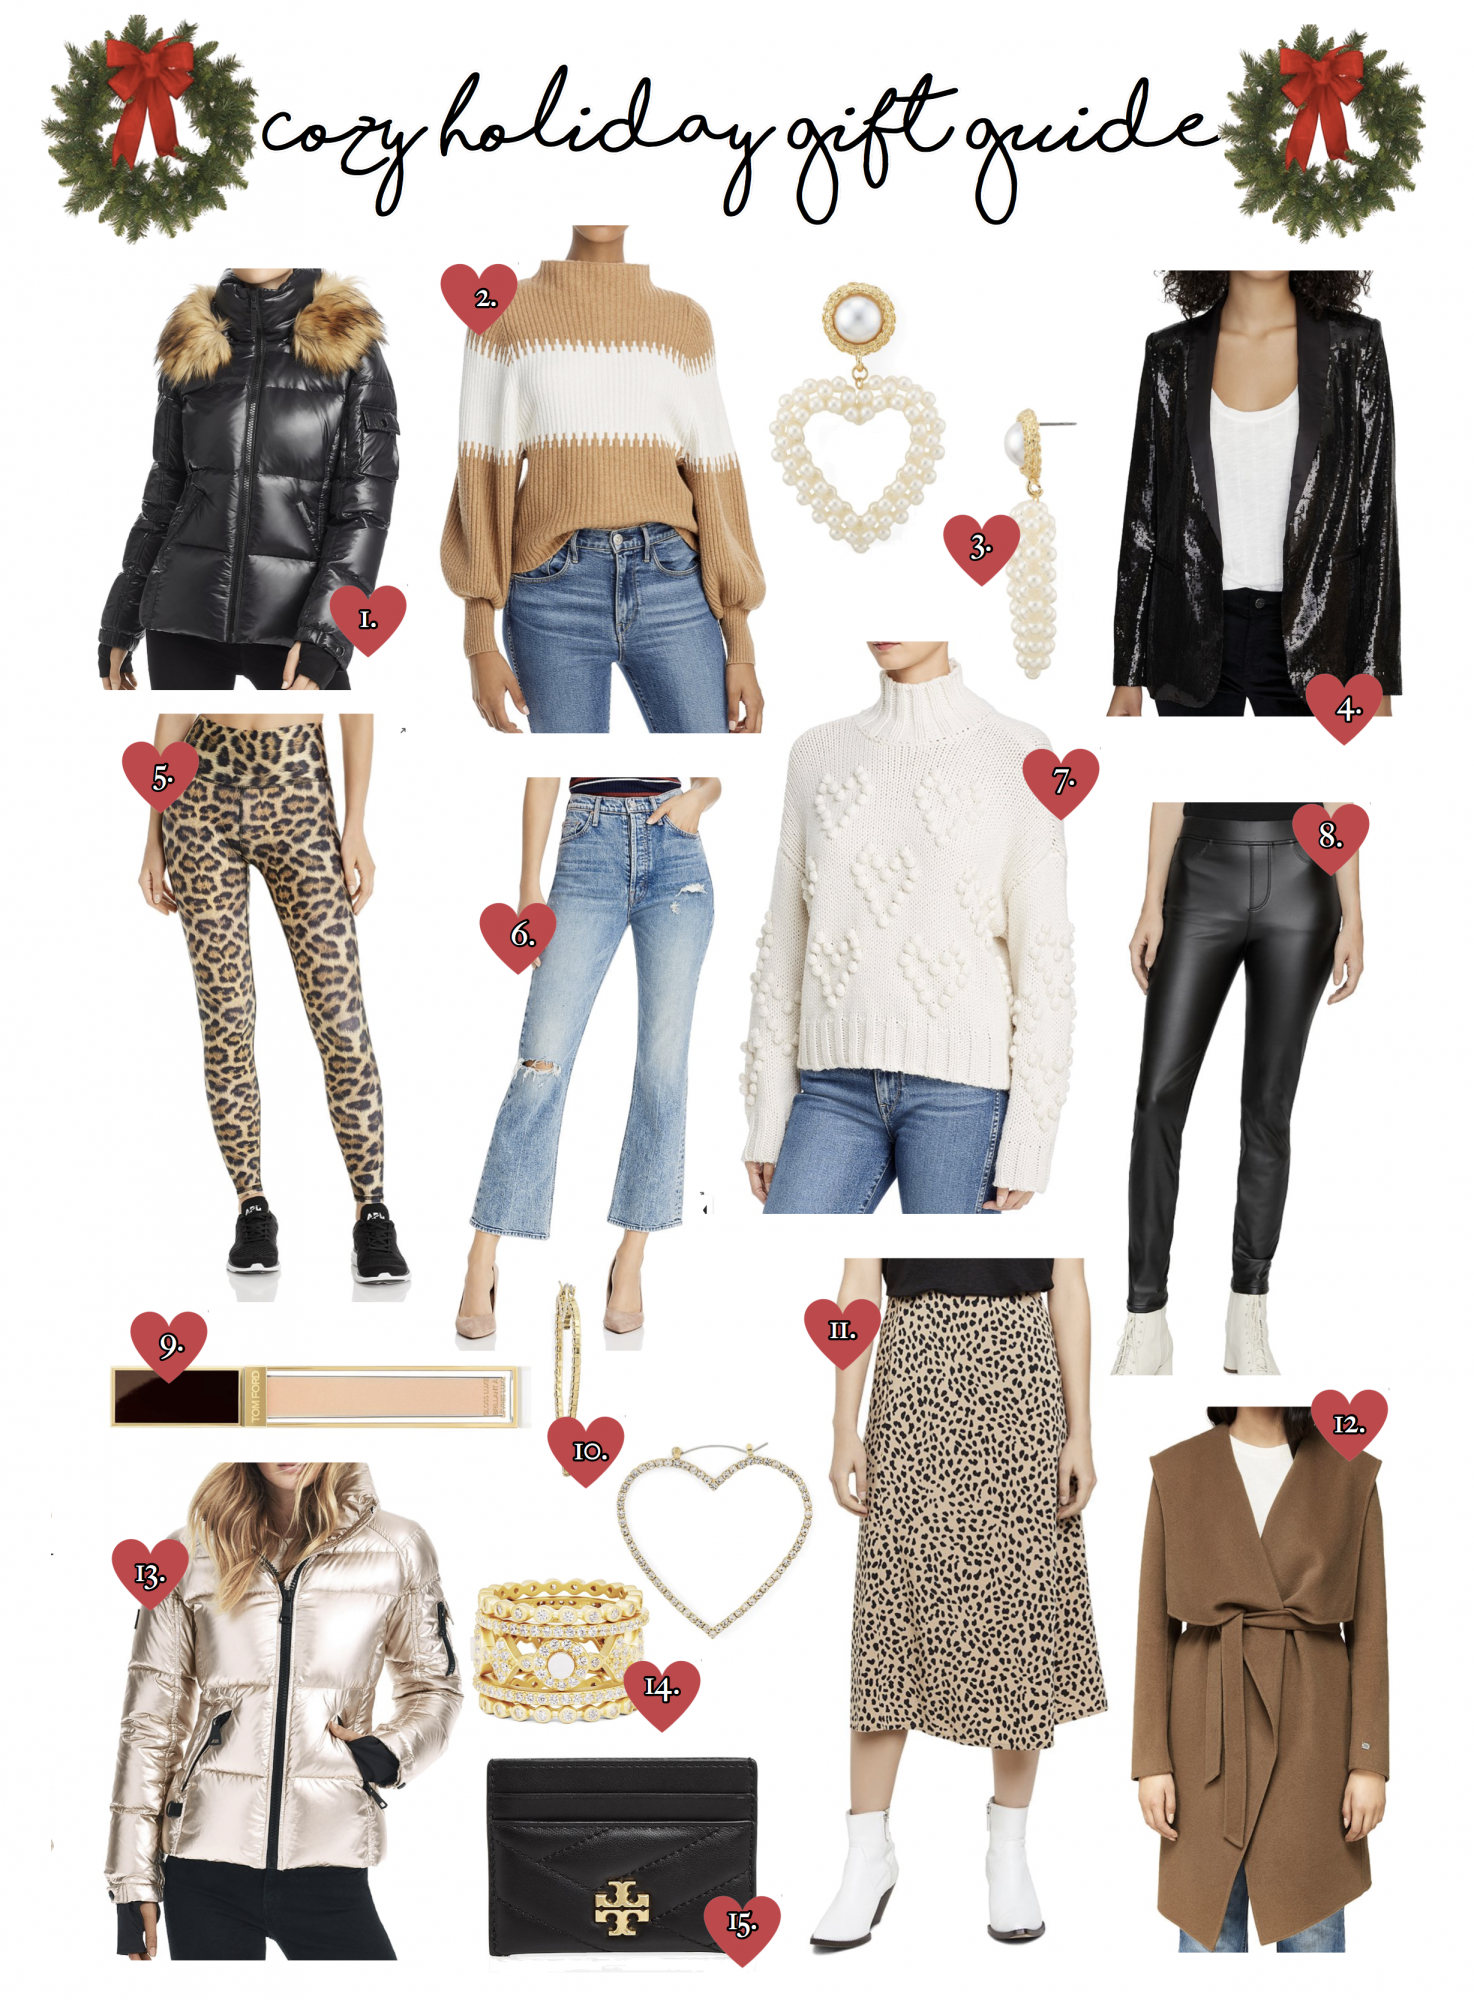 Bloomingdales sweaters holiday gift guide | Cozy Gift Ideas by popular Oklahoma life and style blog, The Sweetest Thing: collage image of MATTE BLACK PUFFER JACKET W/FAUX FUR HOOD TRIM, TAN & WHITE STRIPED MOCK NECK SWEATER, PEARL HEART SHAPED EARRINGS, BLACK SEQUIN BLAZER, LEOPARD PRINT YOGA PANTS, HIGH WAISTED STRAIGHT LEG DENIM, HEART POM TURTLENECK SWEATER, FAUX LEATHER LEGGINGS, TOM FORD LUXE LIP GLOSS, DIAMOND HEART EARRINGS, LEOPARD PRINT MIDI SKIRT, WOOL BLEND DRAPED WRAP COAT, ROSE GOLD PUFFER JACKET, GOLD STACKED RINGS, TORY BURCH CARD CASE, JOIE SWEATER, KATE SPADE PINK TEDDY BEAR JACKET, FRENCH CONNECTION SEQUIN DRESS, and LINE & DOT FRINGE SWEATER.